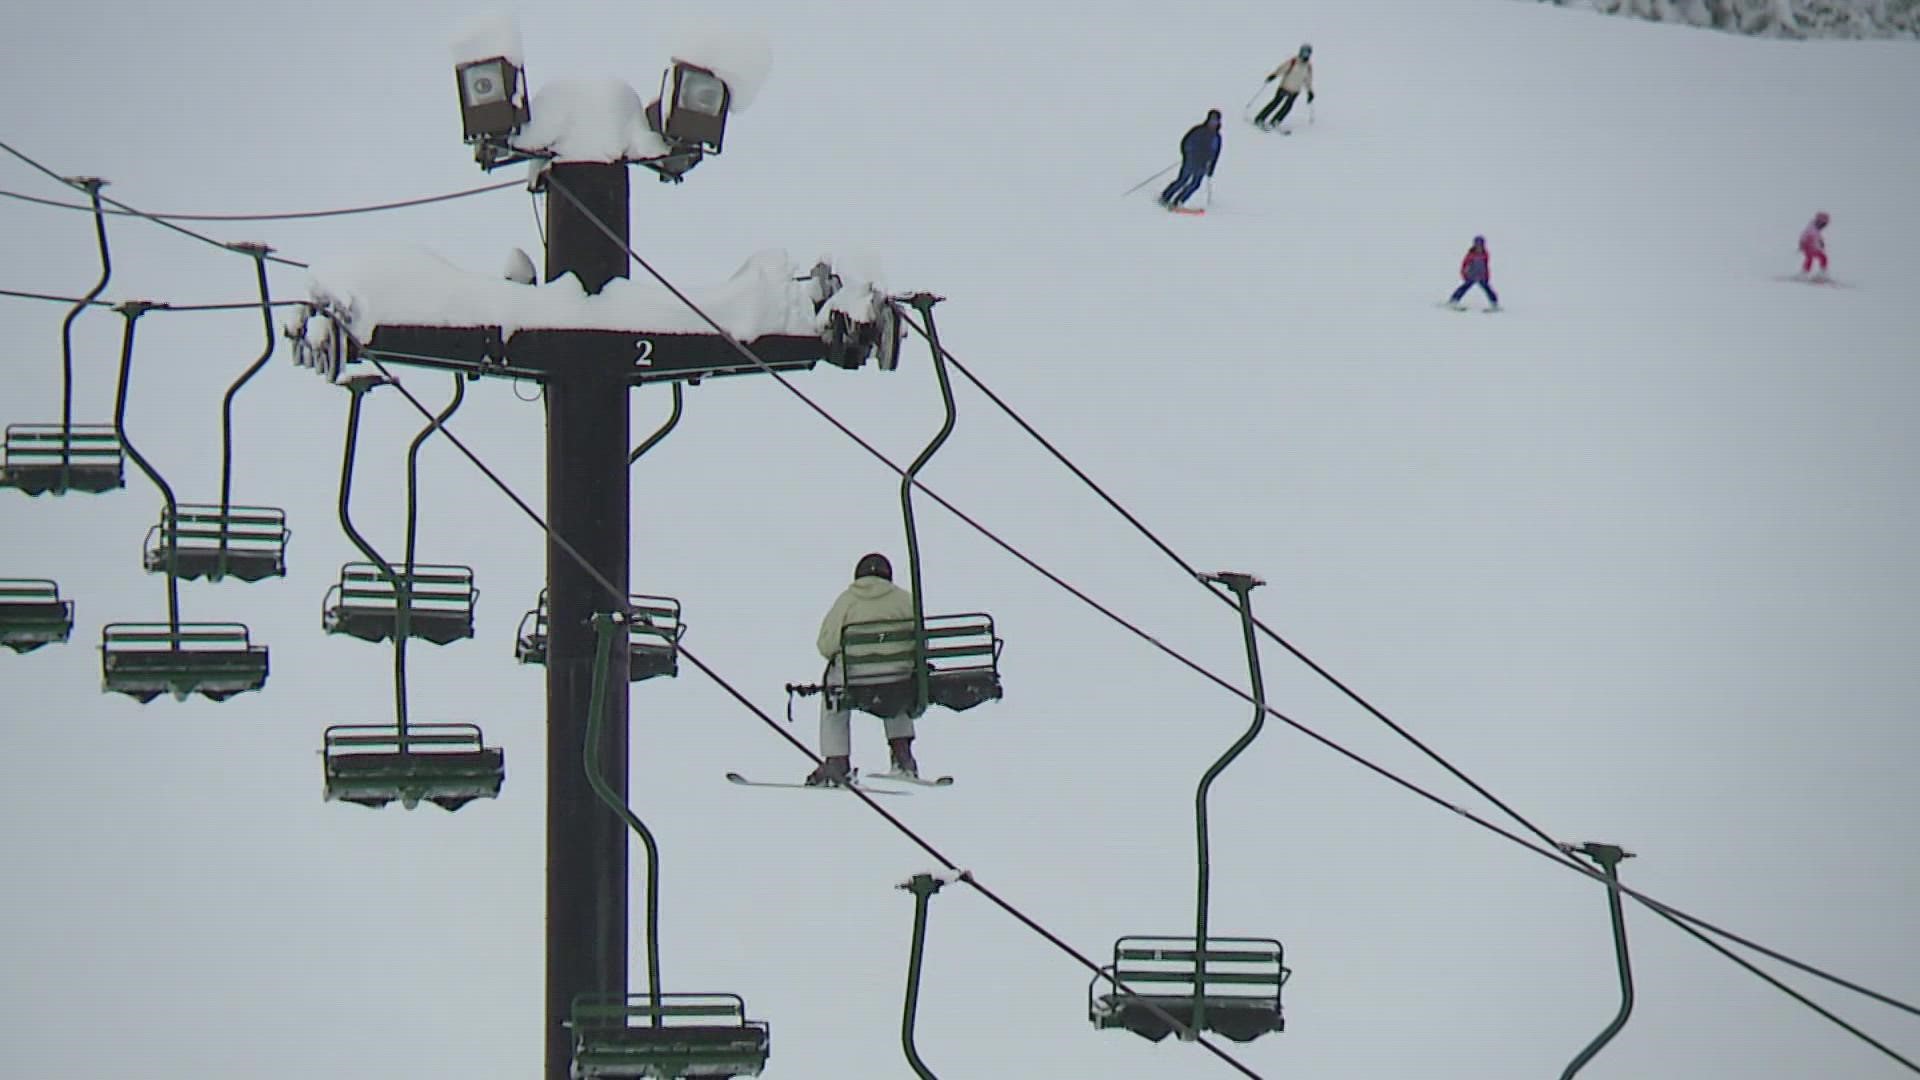 The Summit at Snoqualmie opened to Summit and Ikon pass holders on Tuesday with a 44-inch base.